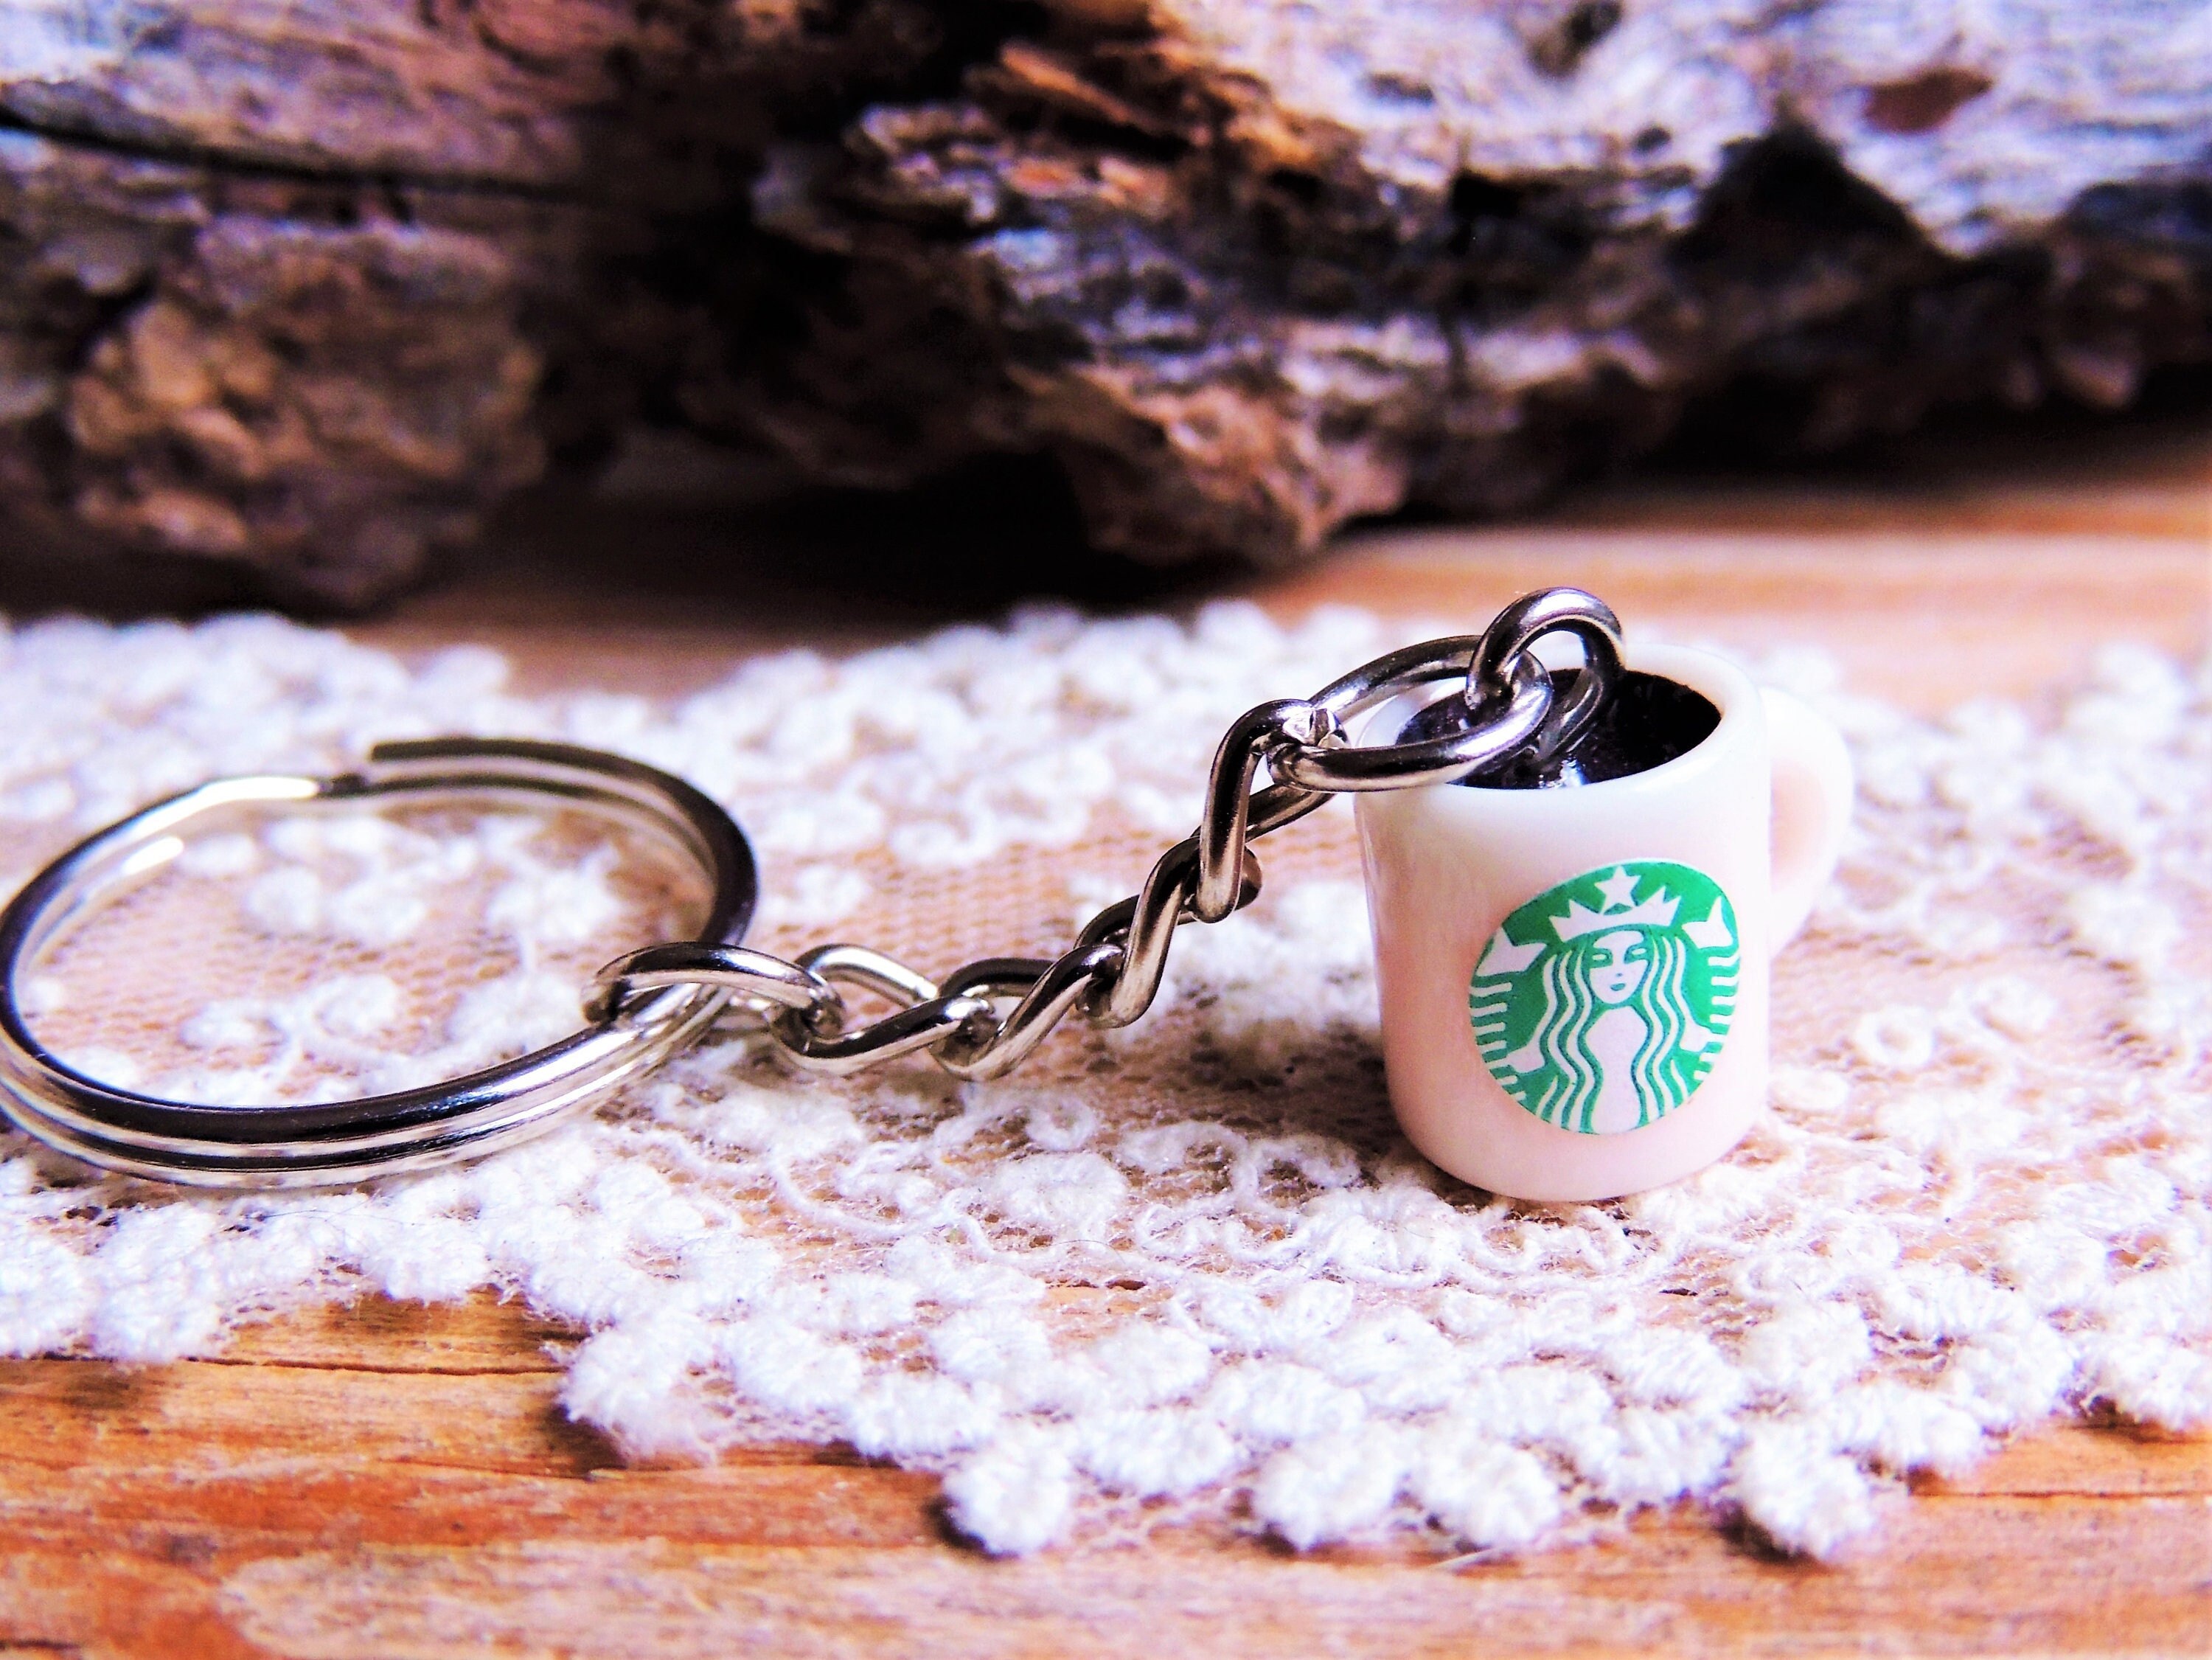 Starbucks keychain China 2023 new year Keychains without plastic plate